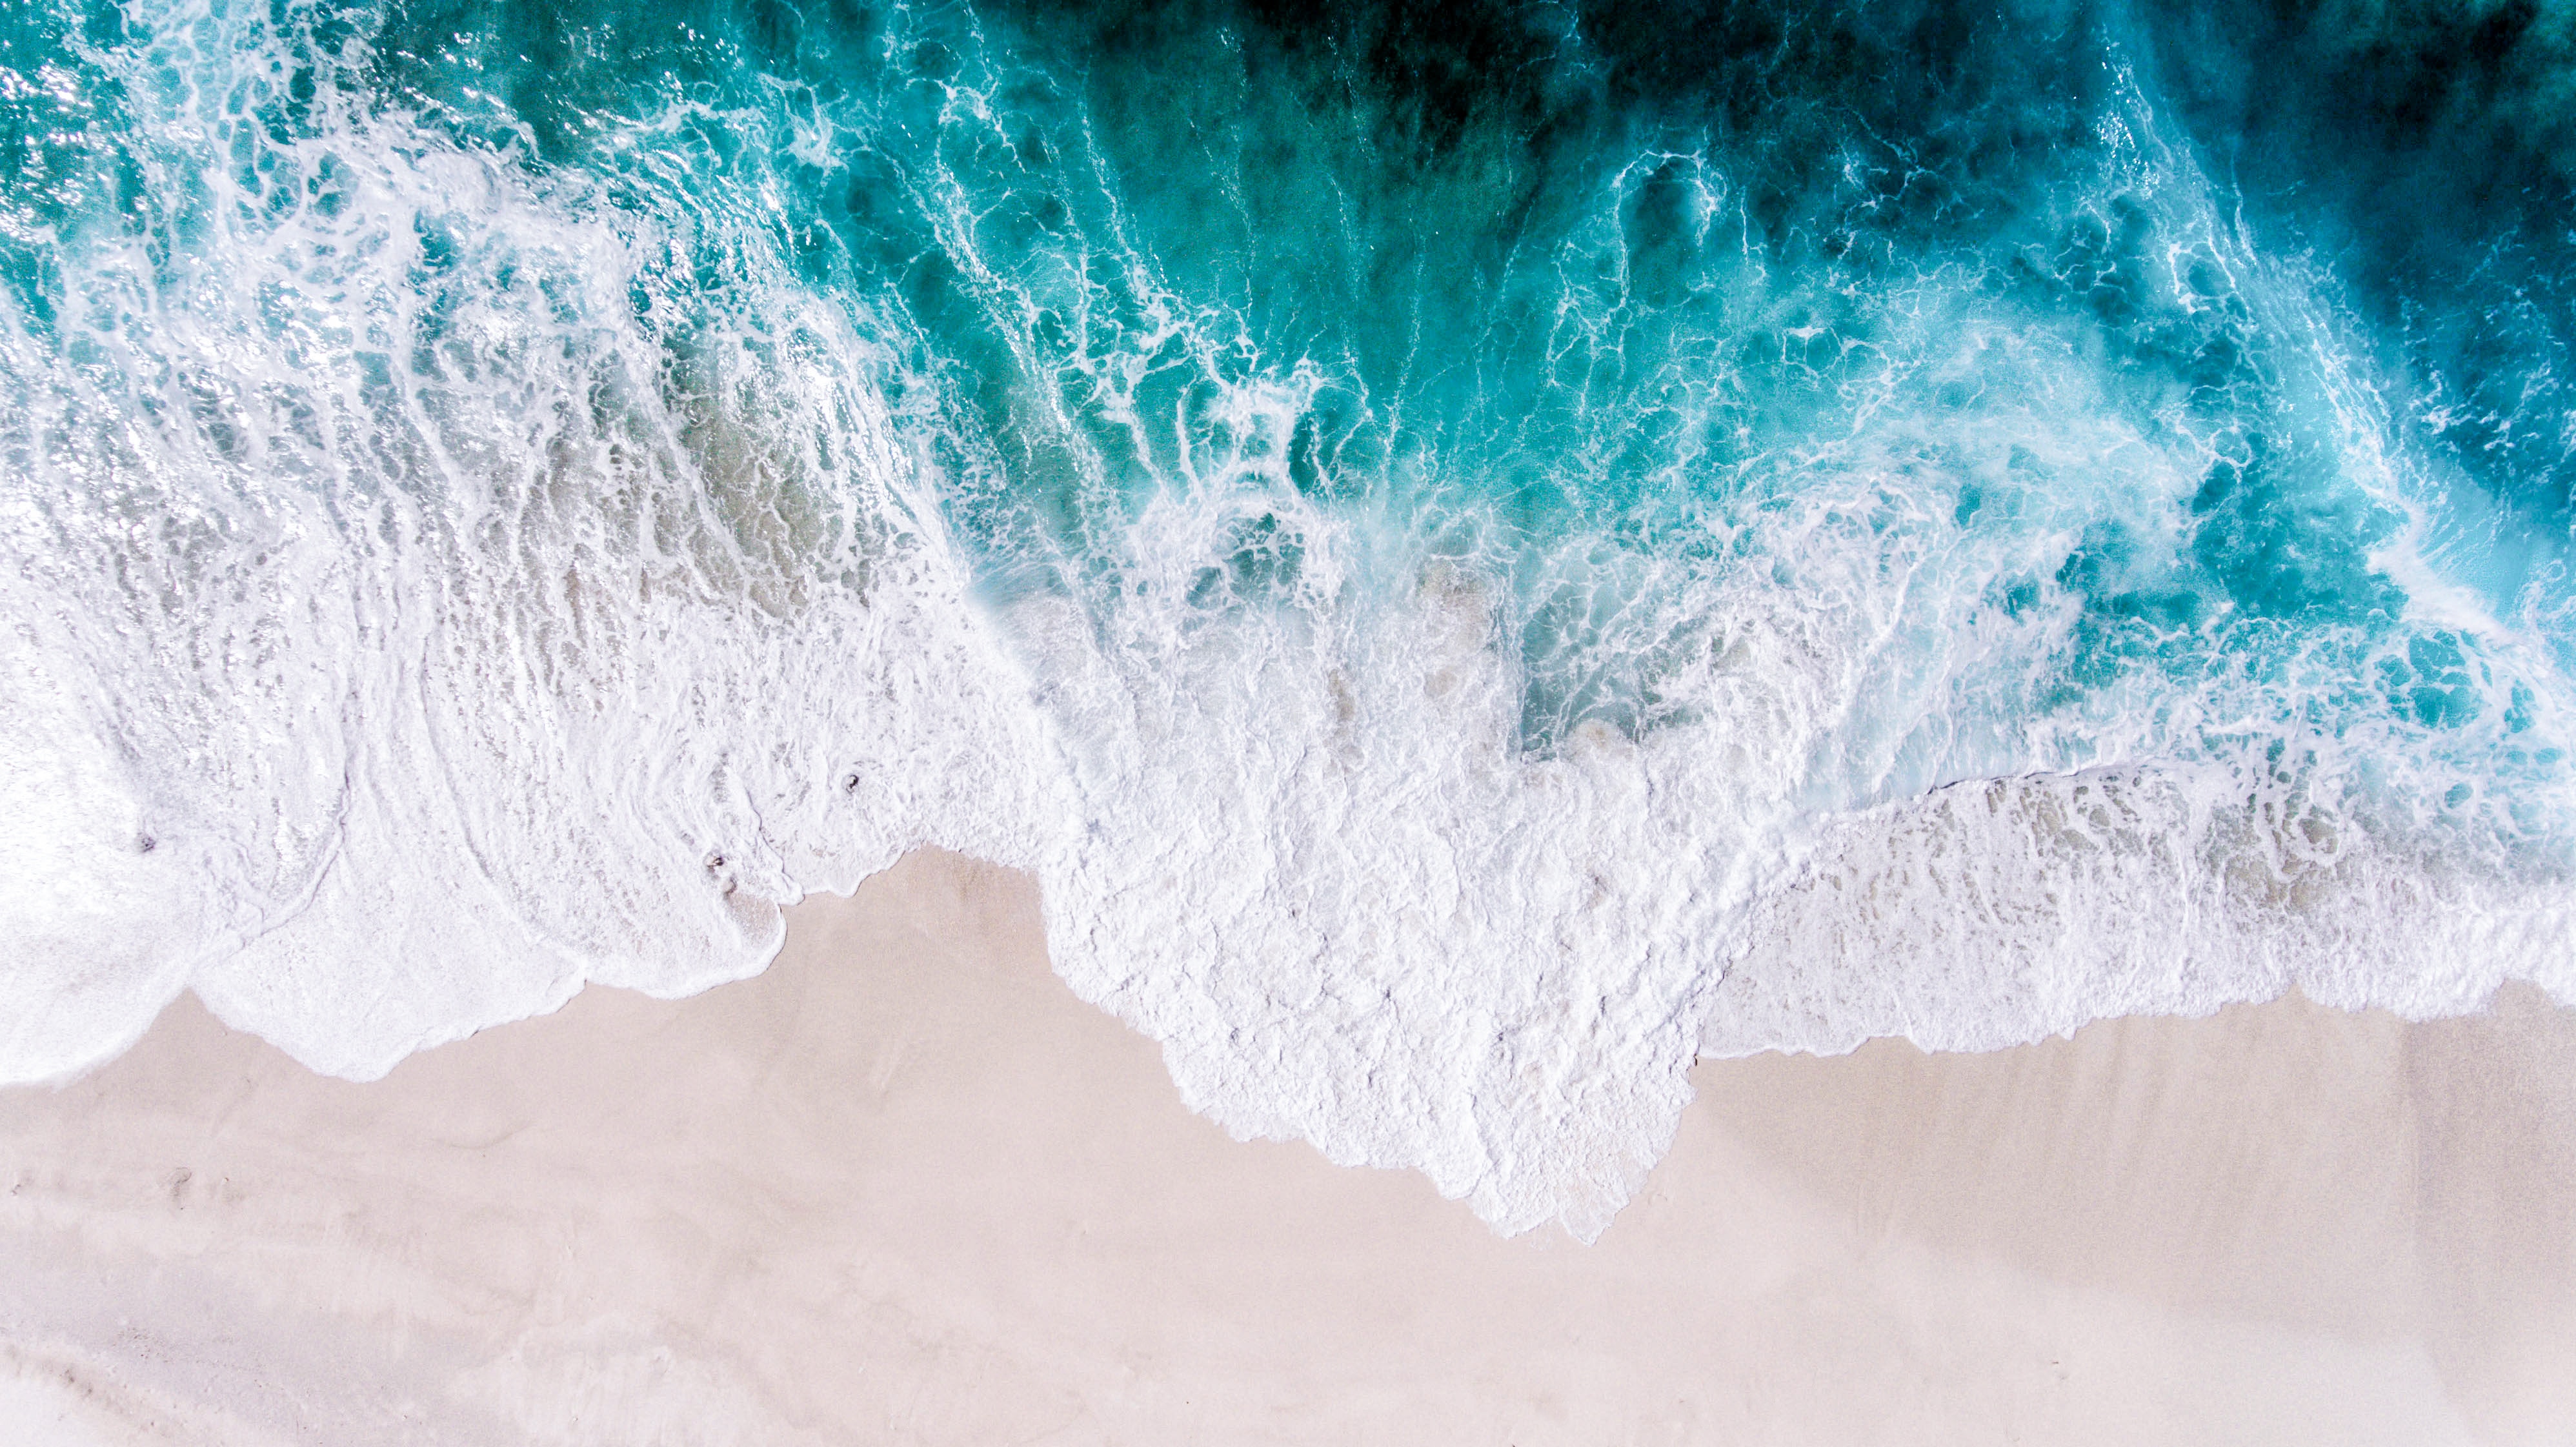 wave, ocean, shore, sand, view from above, nature, bank, foam, surf